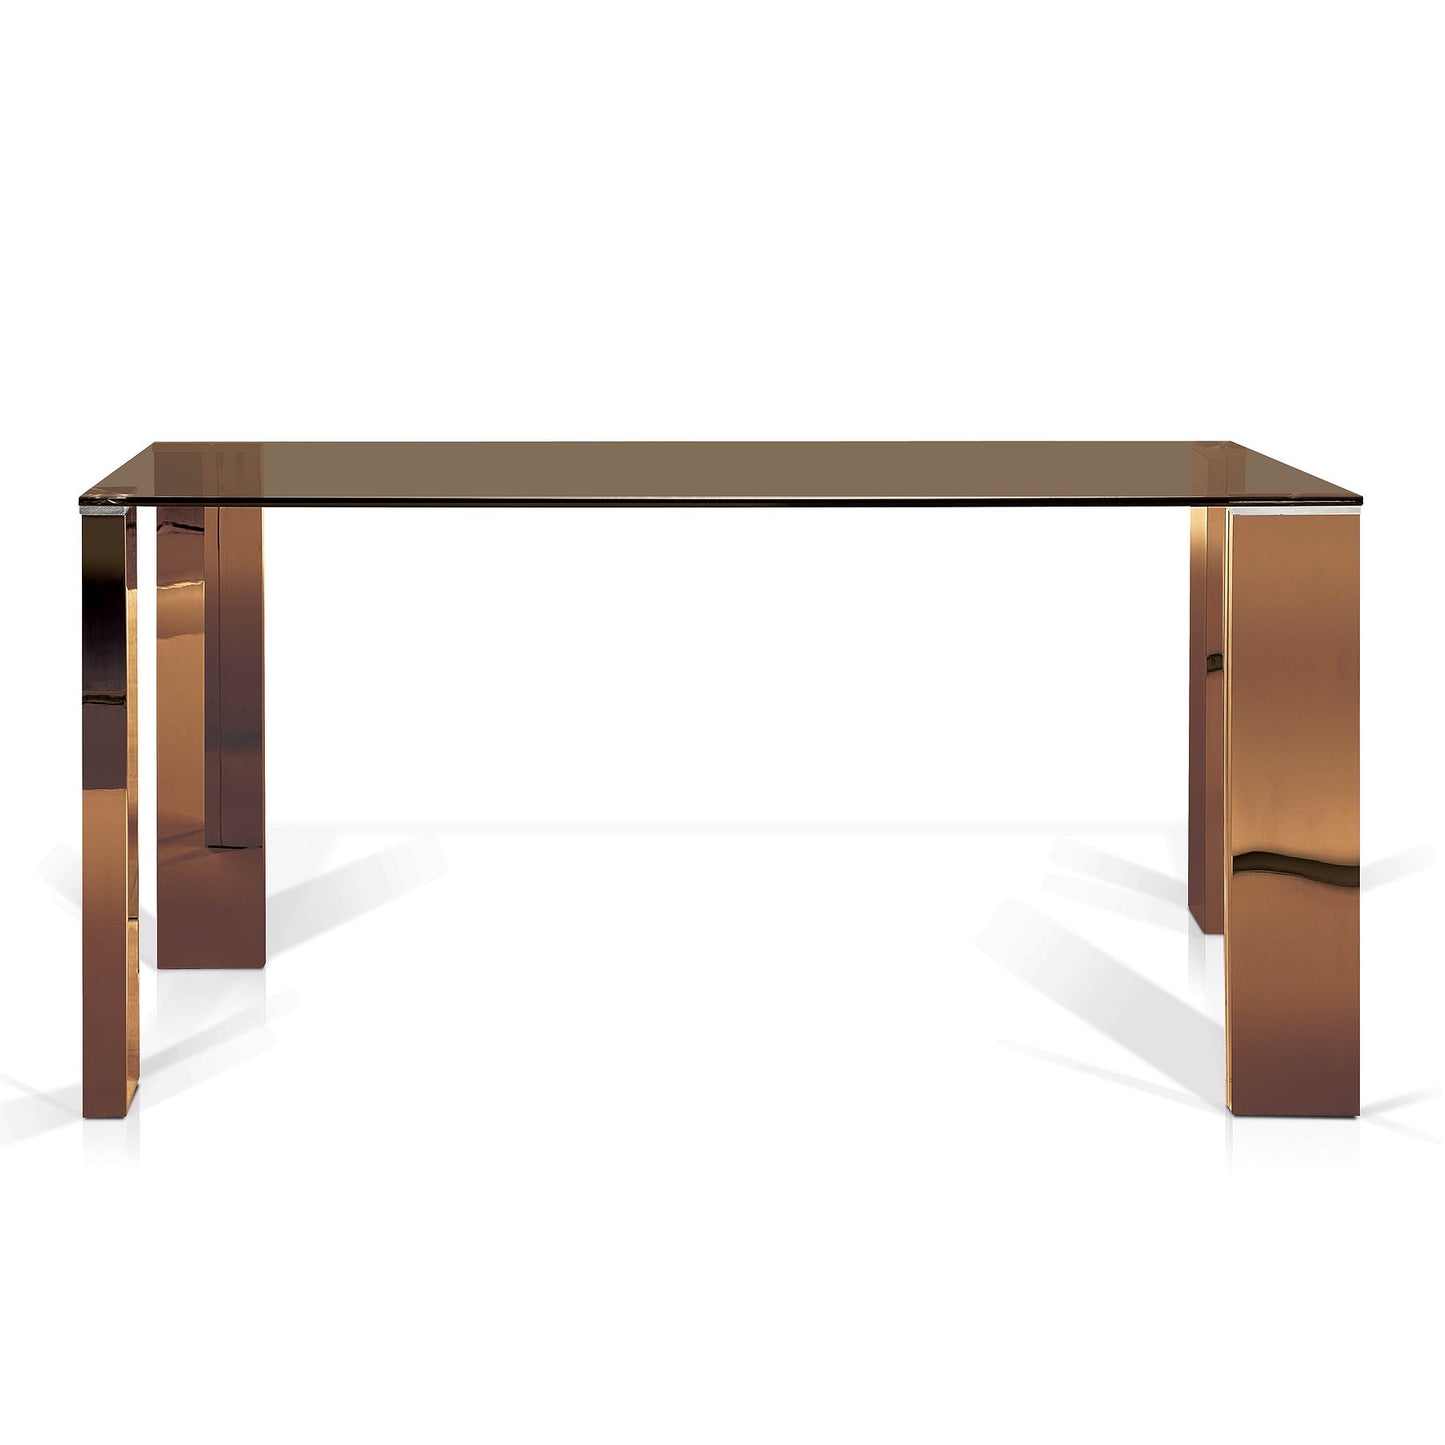 baron - dining table - Dreamart Gallery